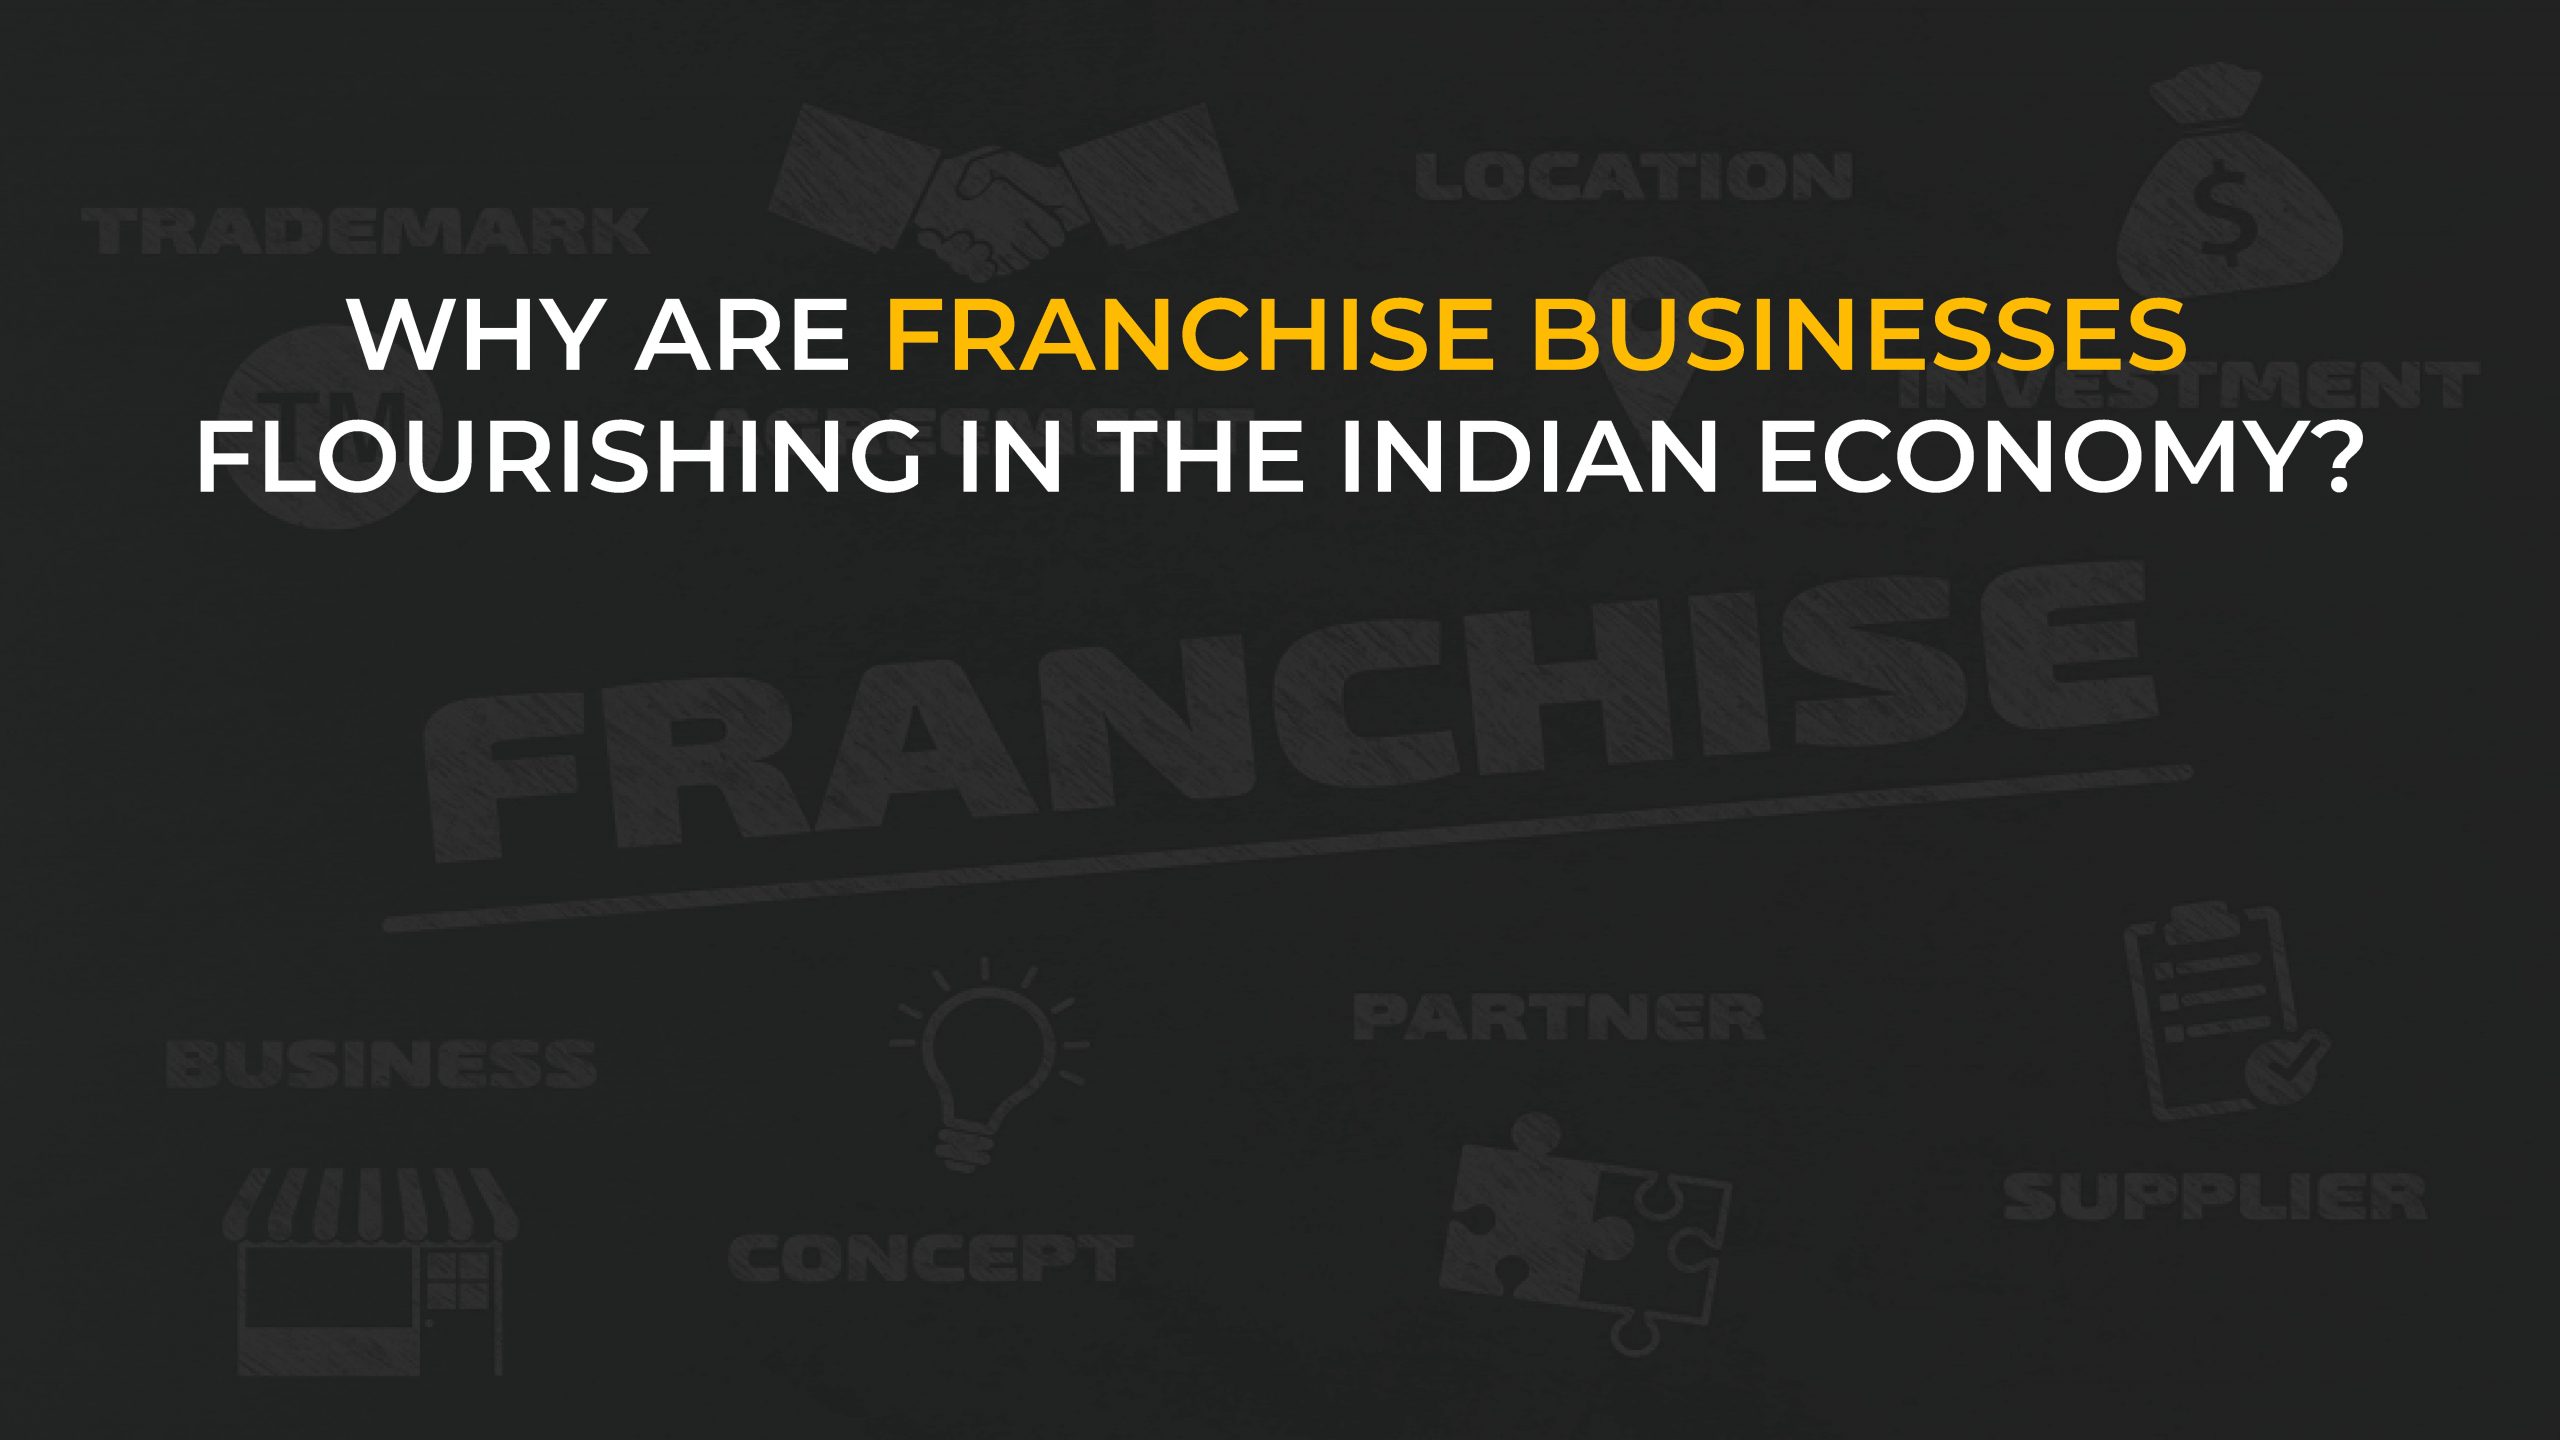 Why are franchise businesses flourishing in the Indian economy?